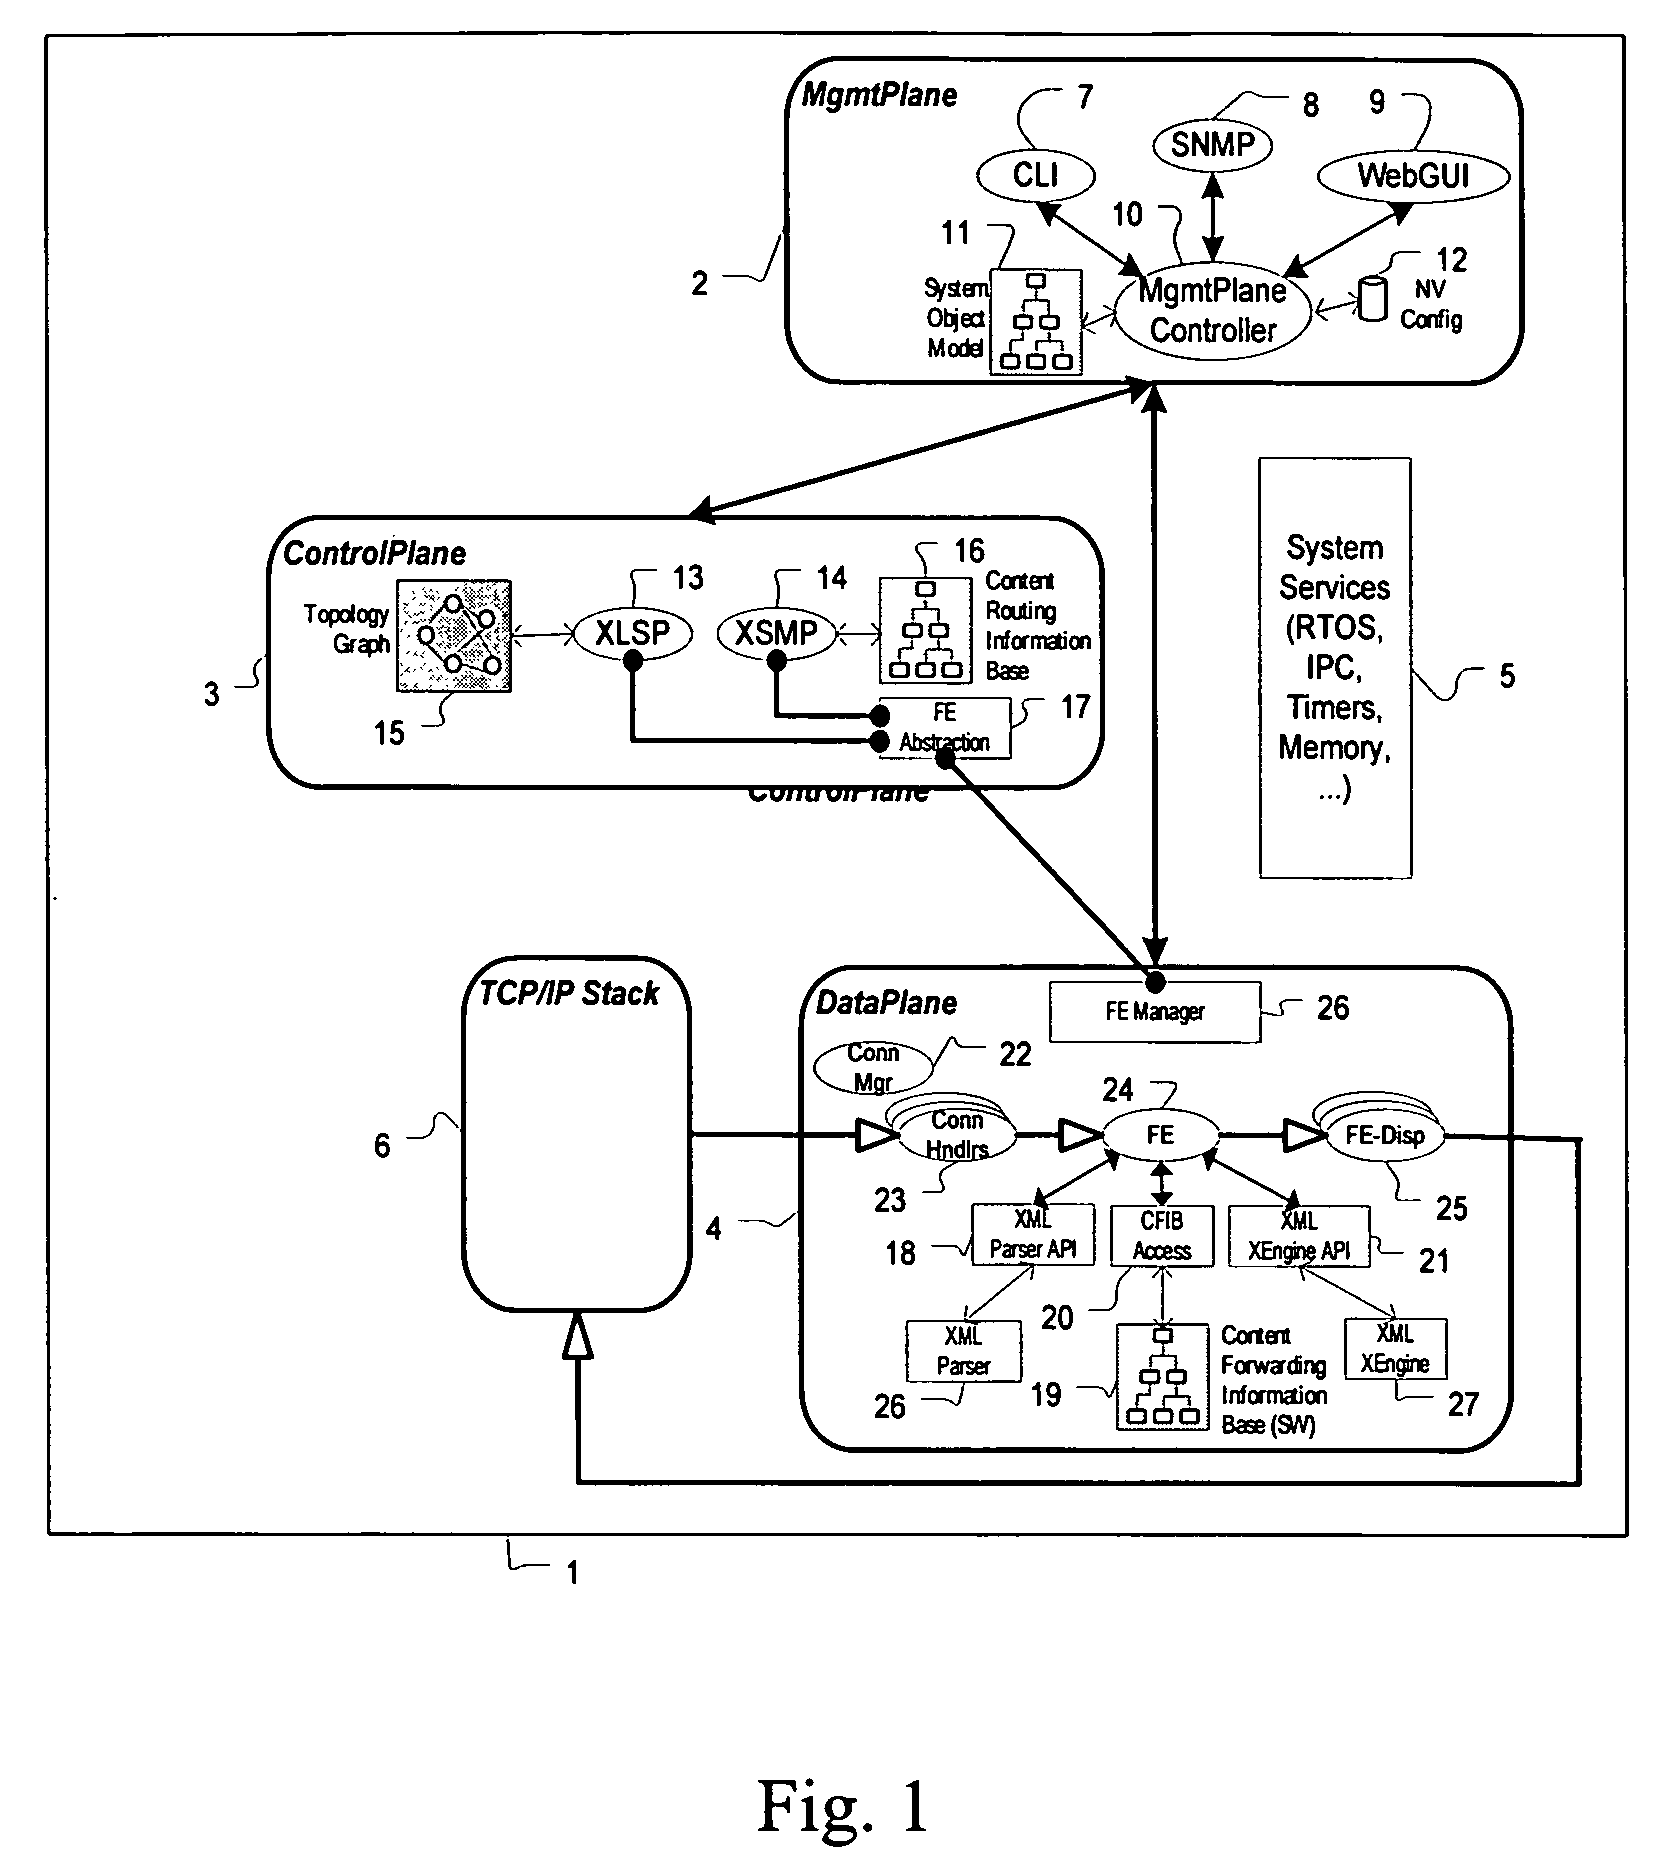 Content router with multiple forwarding elements instantiated on hardware entities